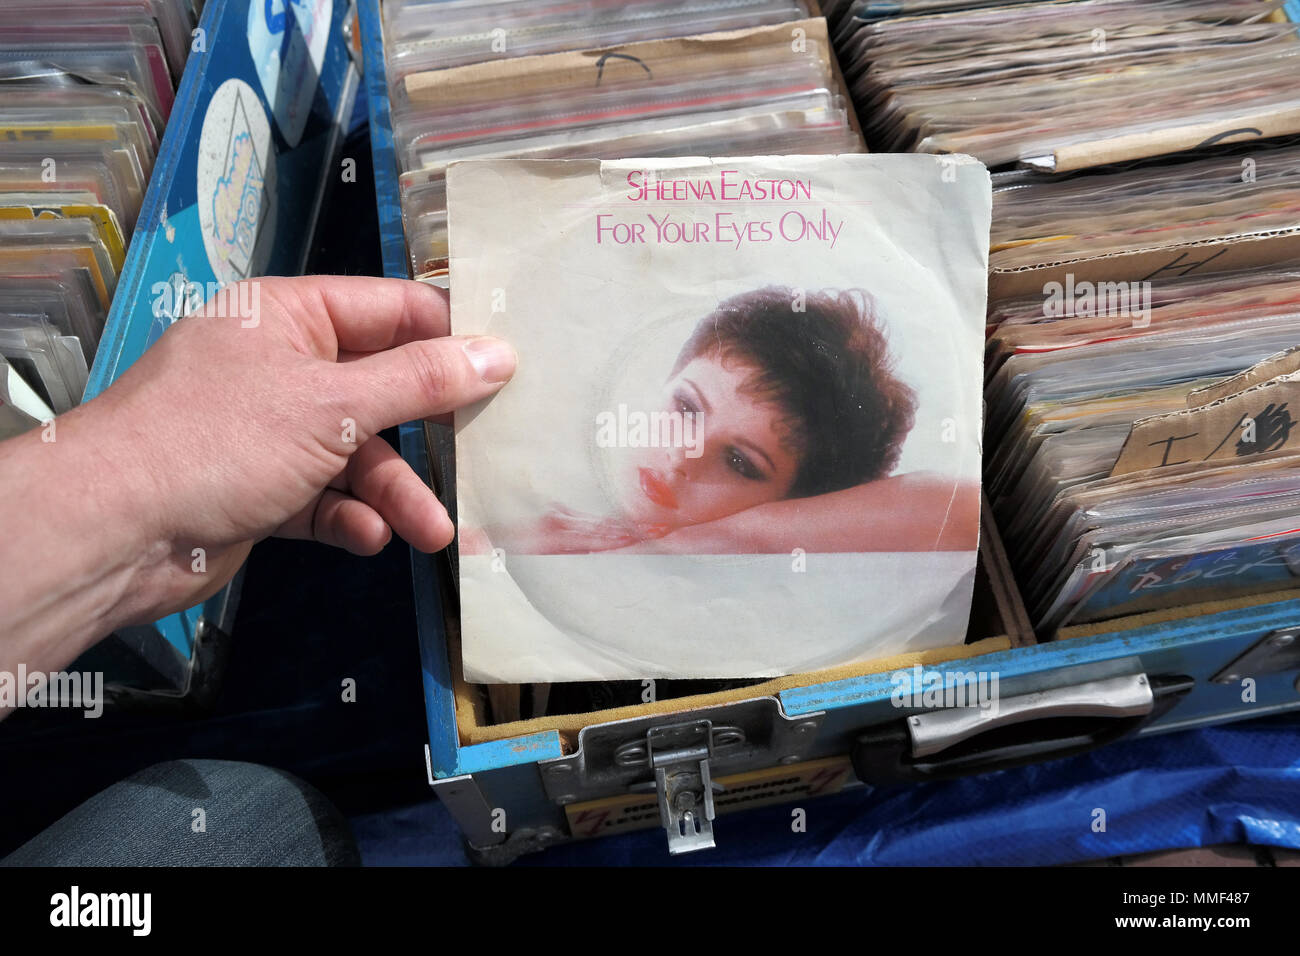 Sheena Easton - For Your Eyes Only Stock Photo